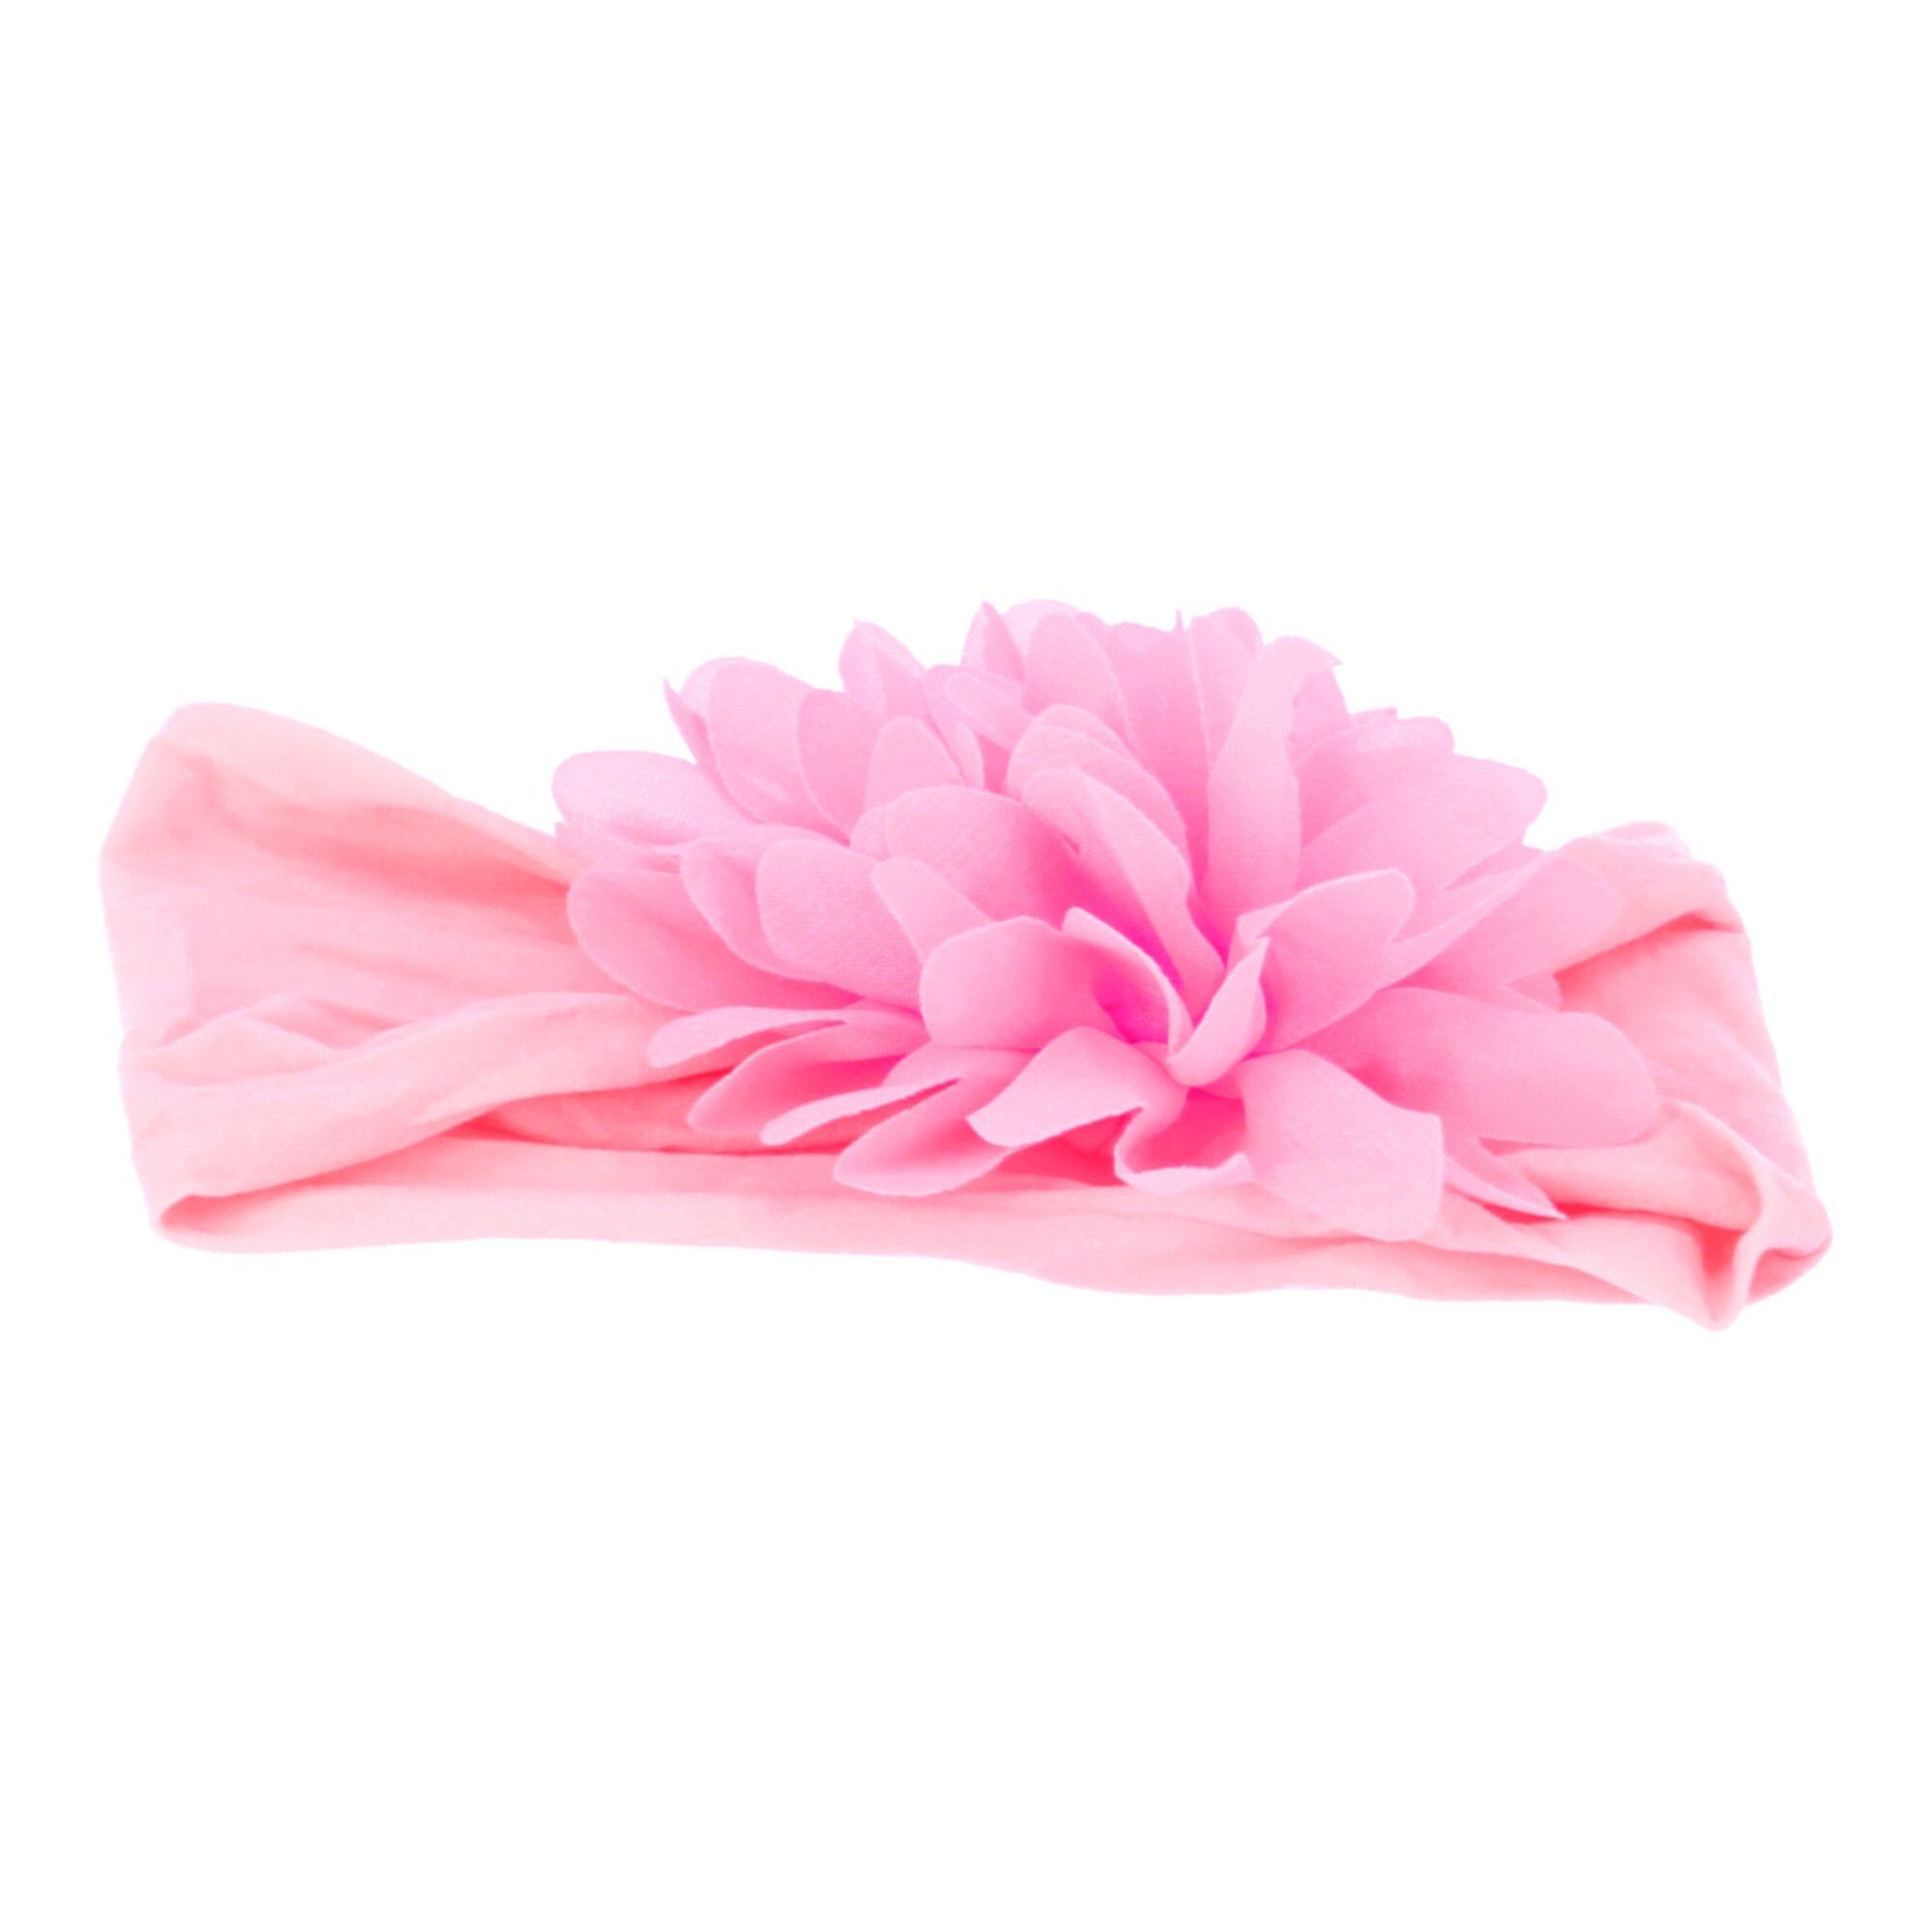 Baby headband with a flower - pink, wide